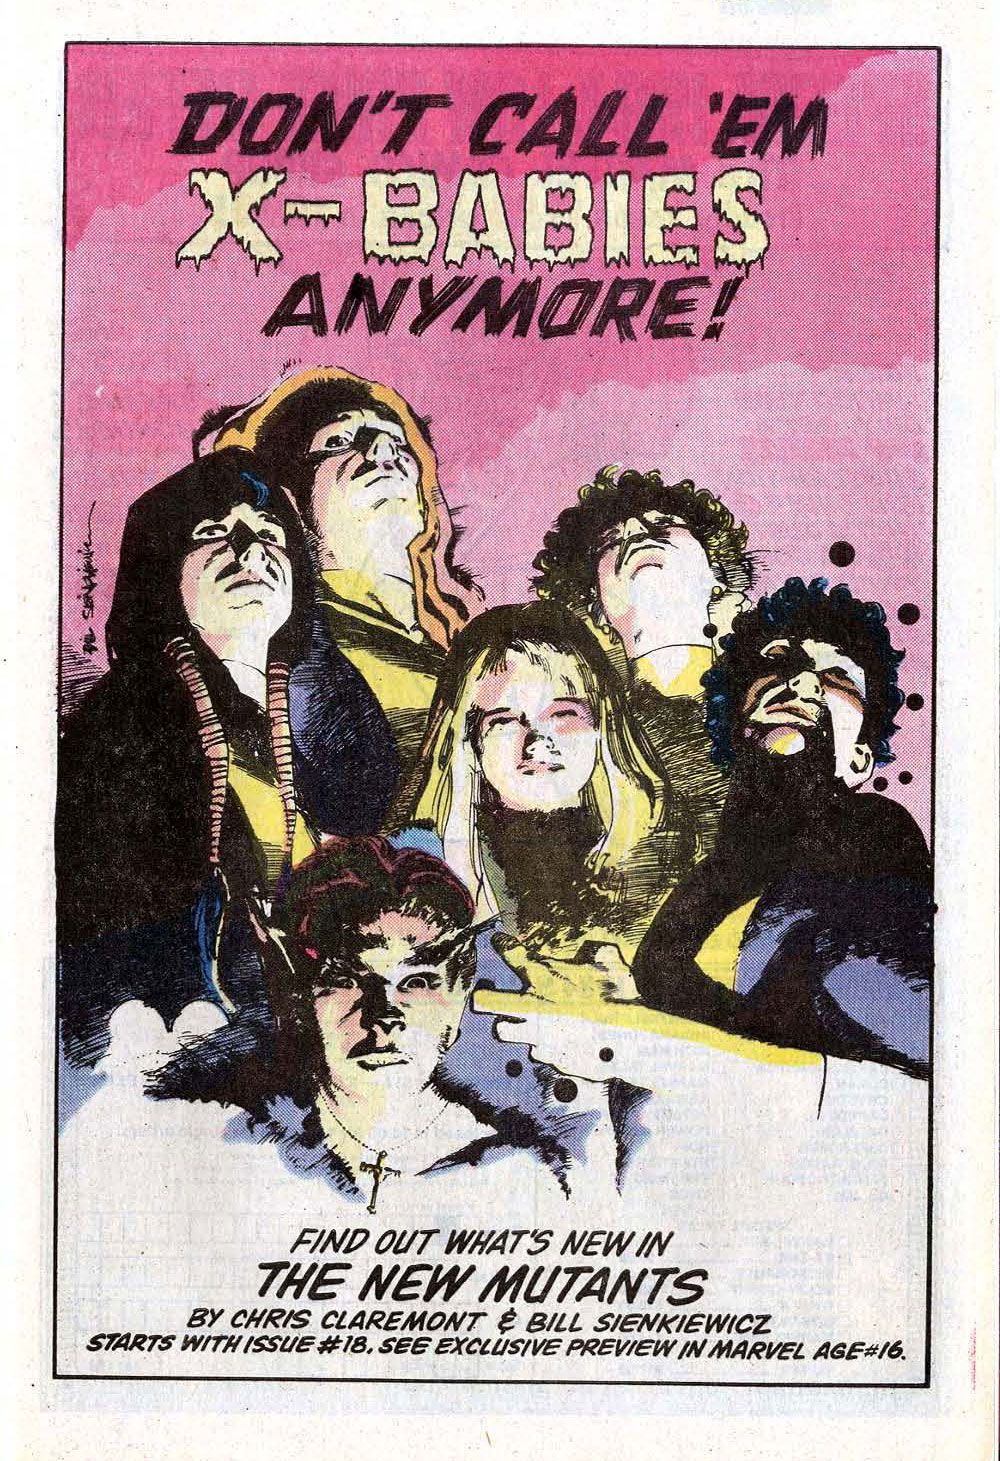 New Mutants Movie Cover Wallpapers